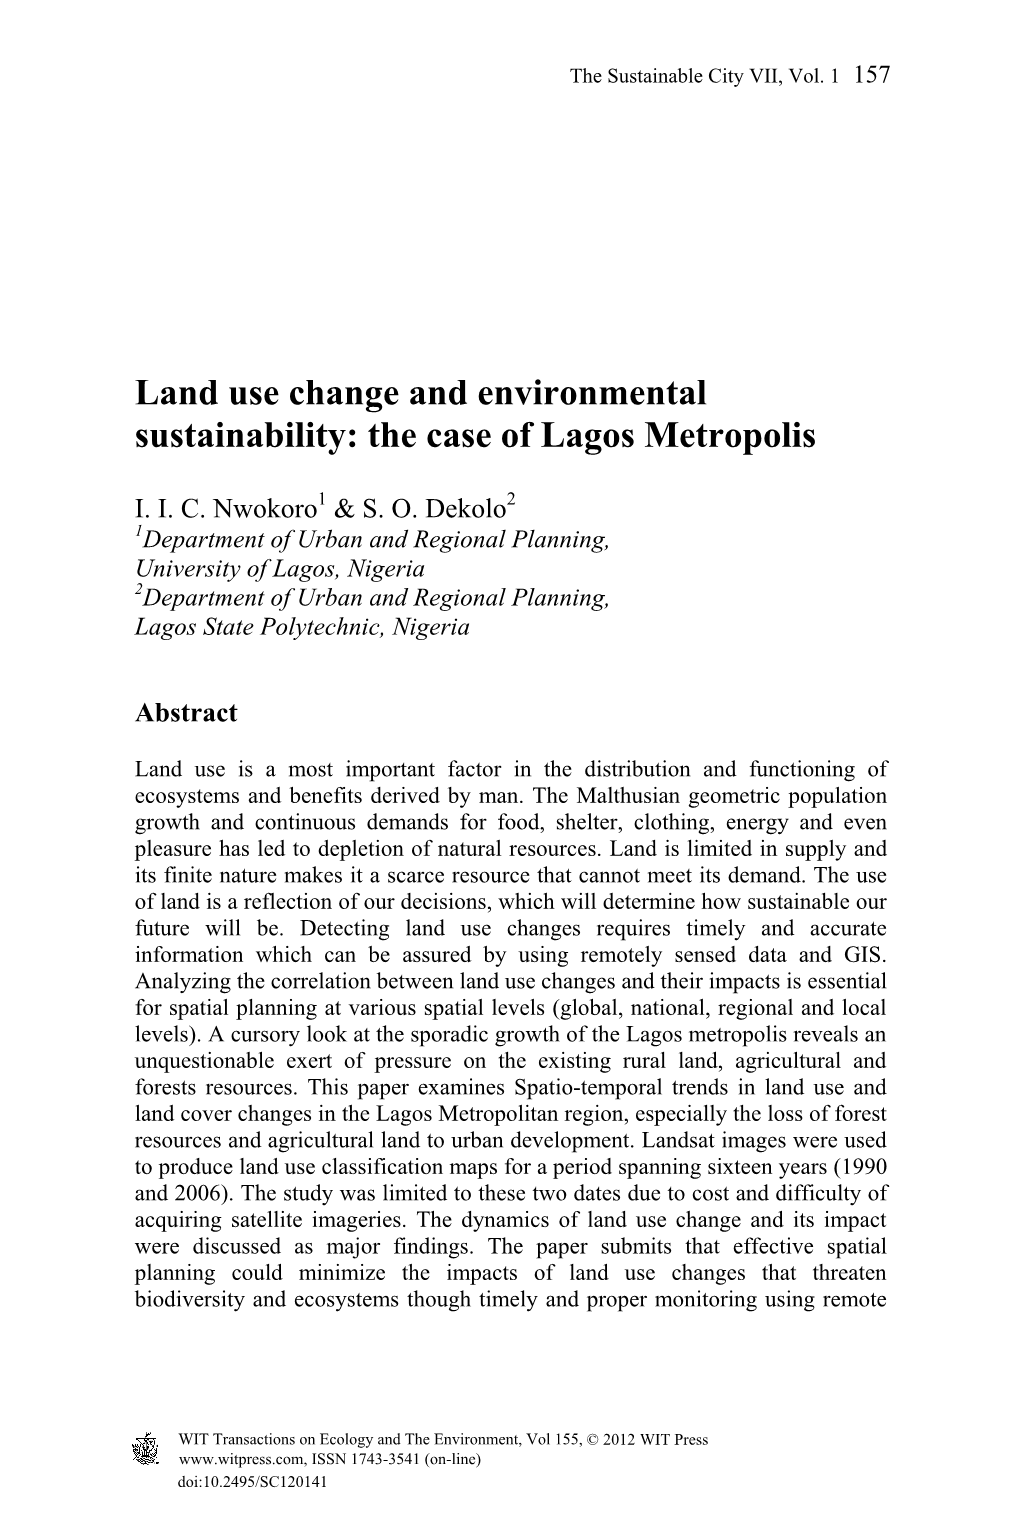 Land Use Change and Environmental Sustainability: the Case of Lagos Metropolis